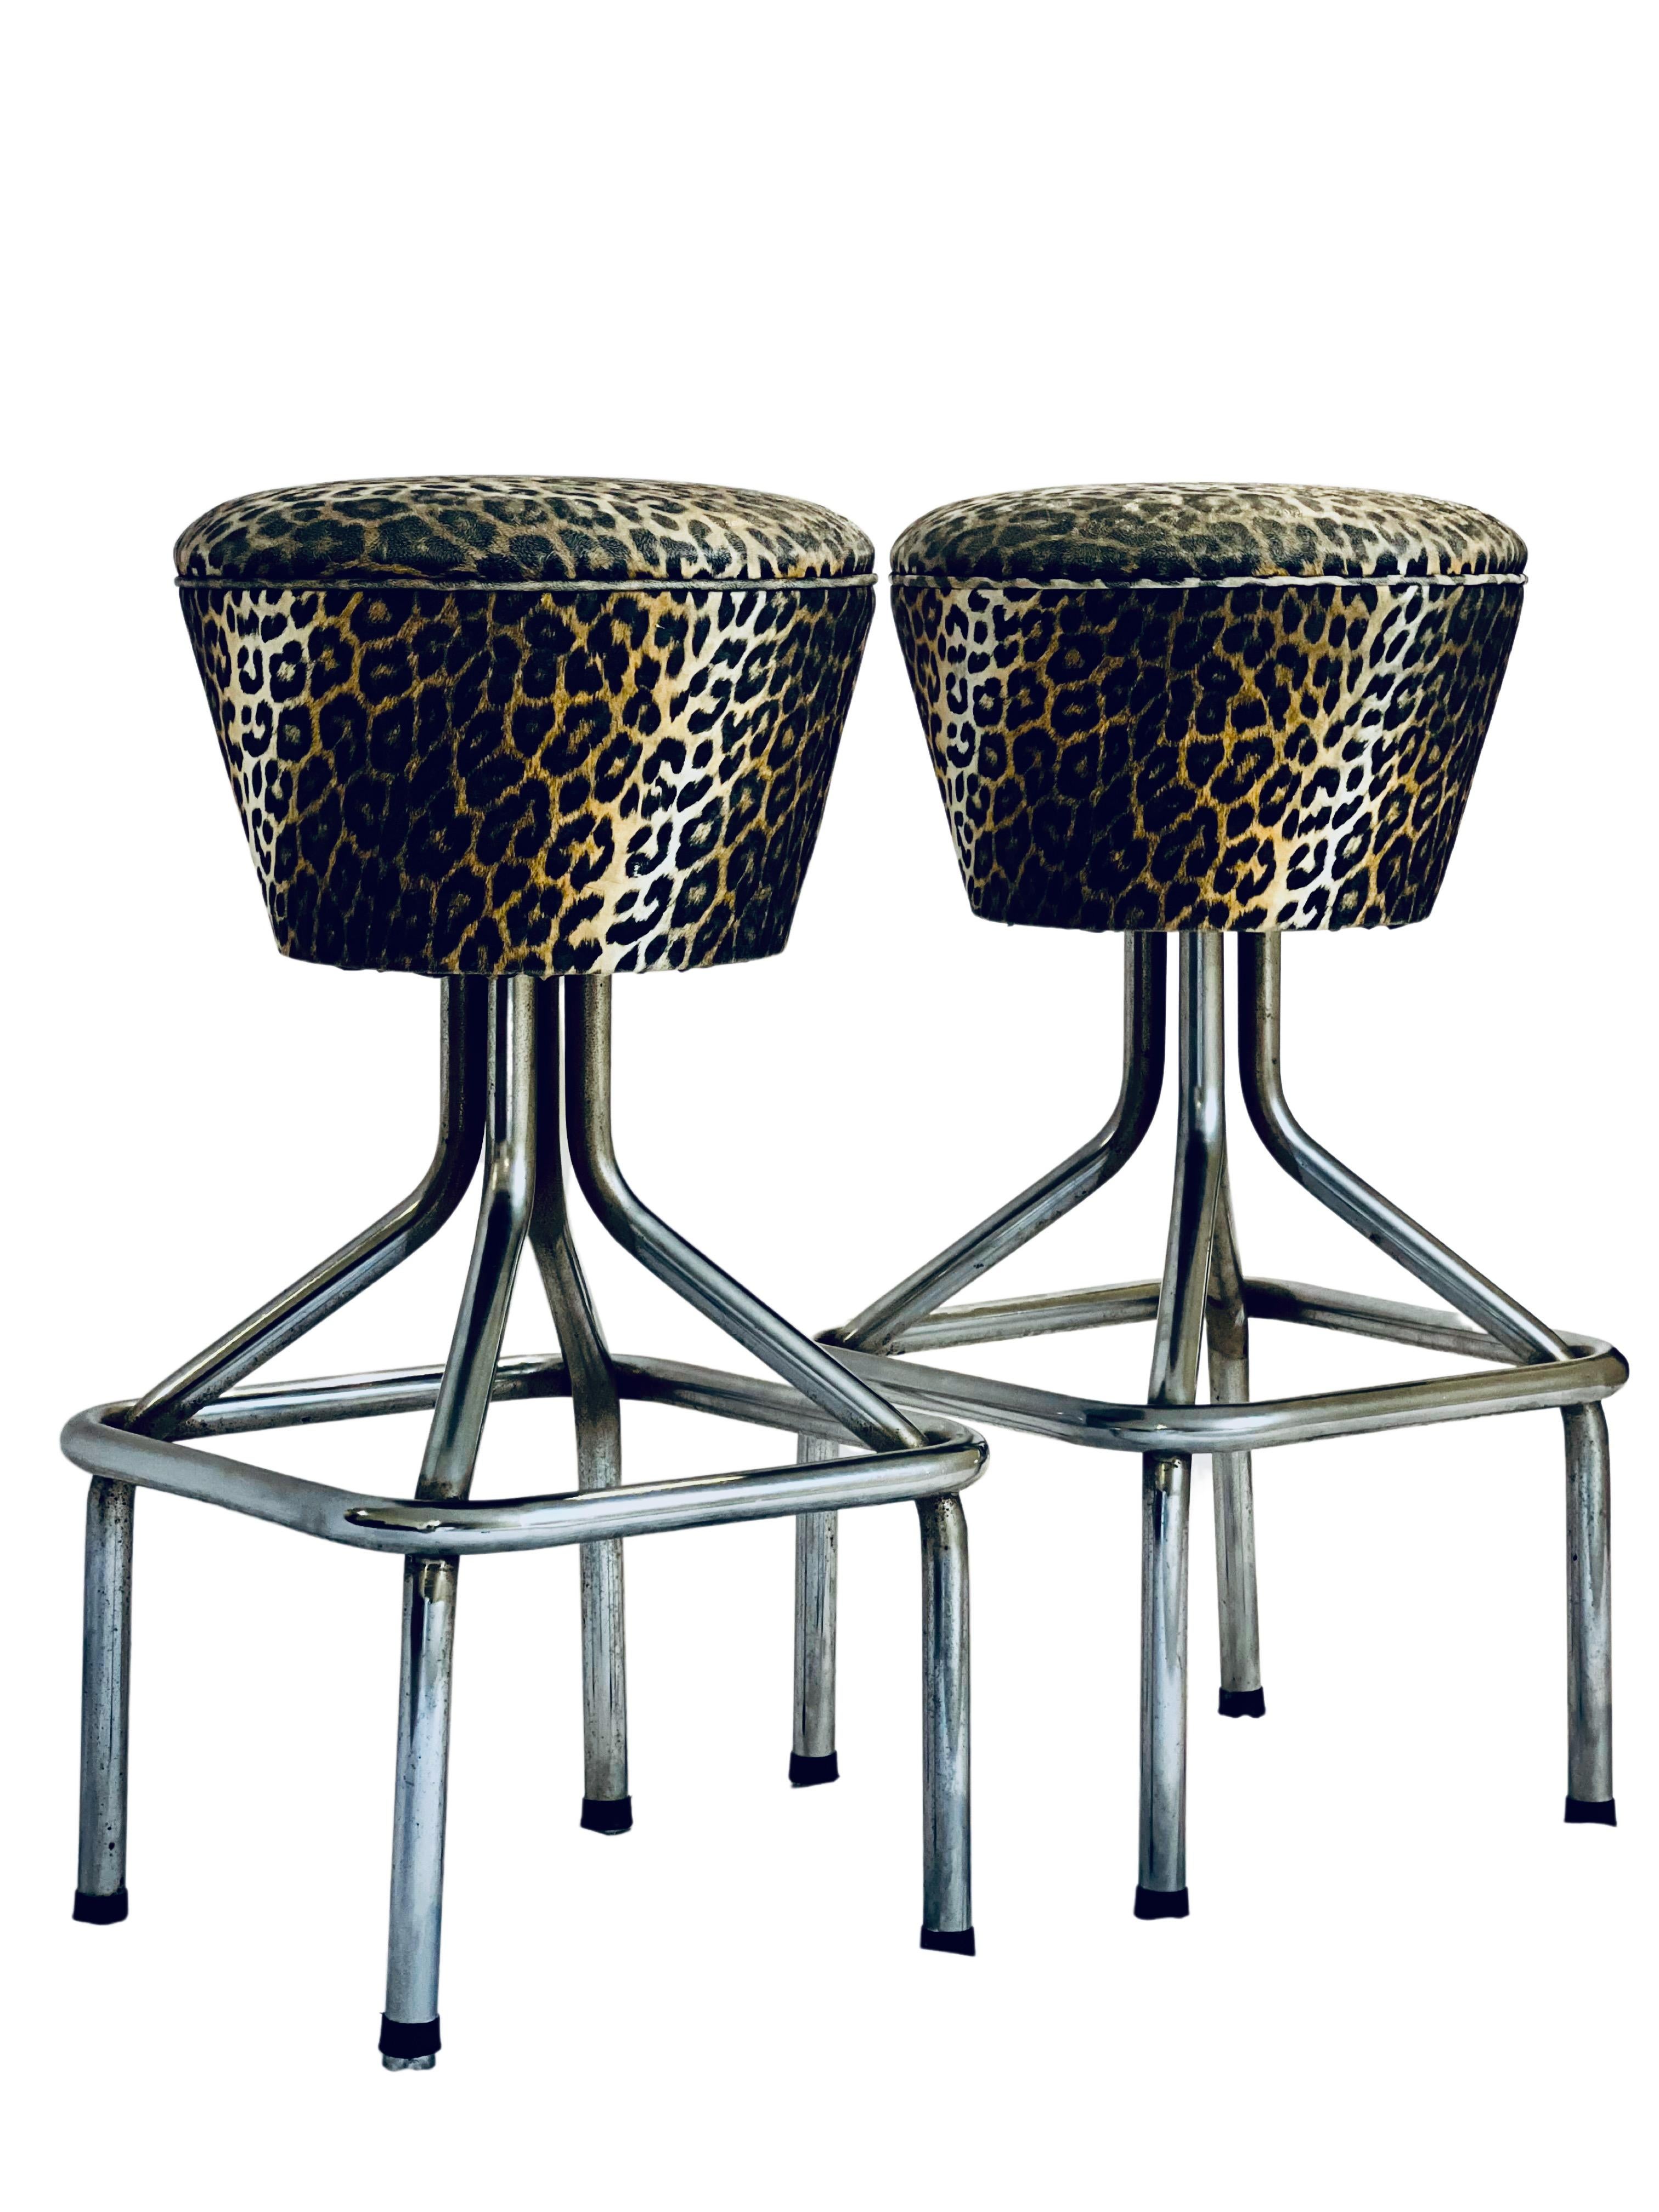 Unknown Mid Century Chrome Faux Leopard Swivel Bar Stools, a Pair For Sale